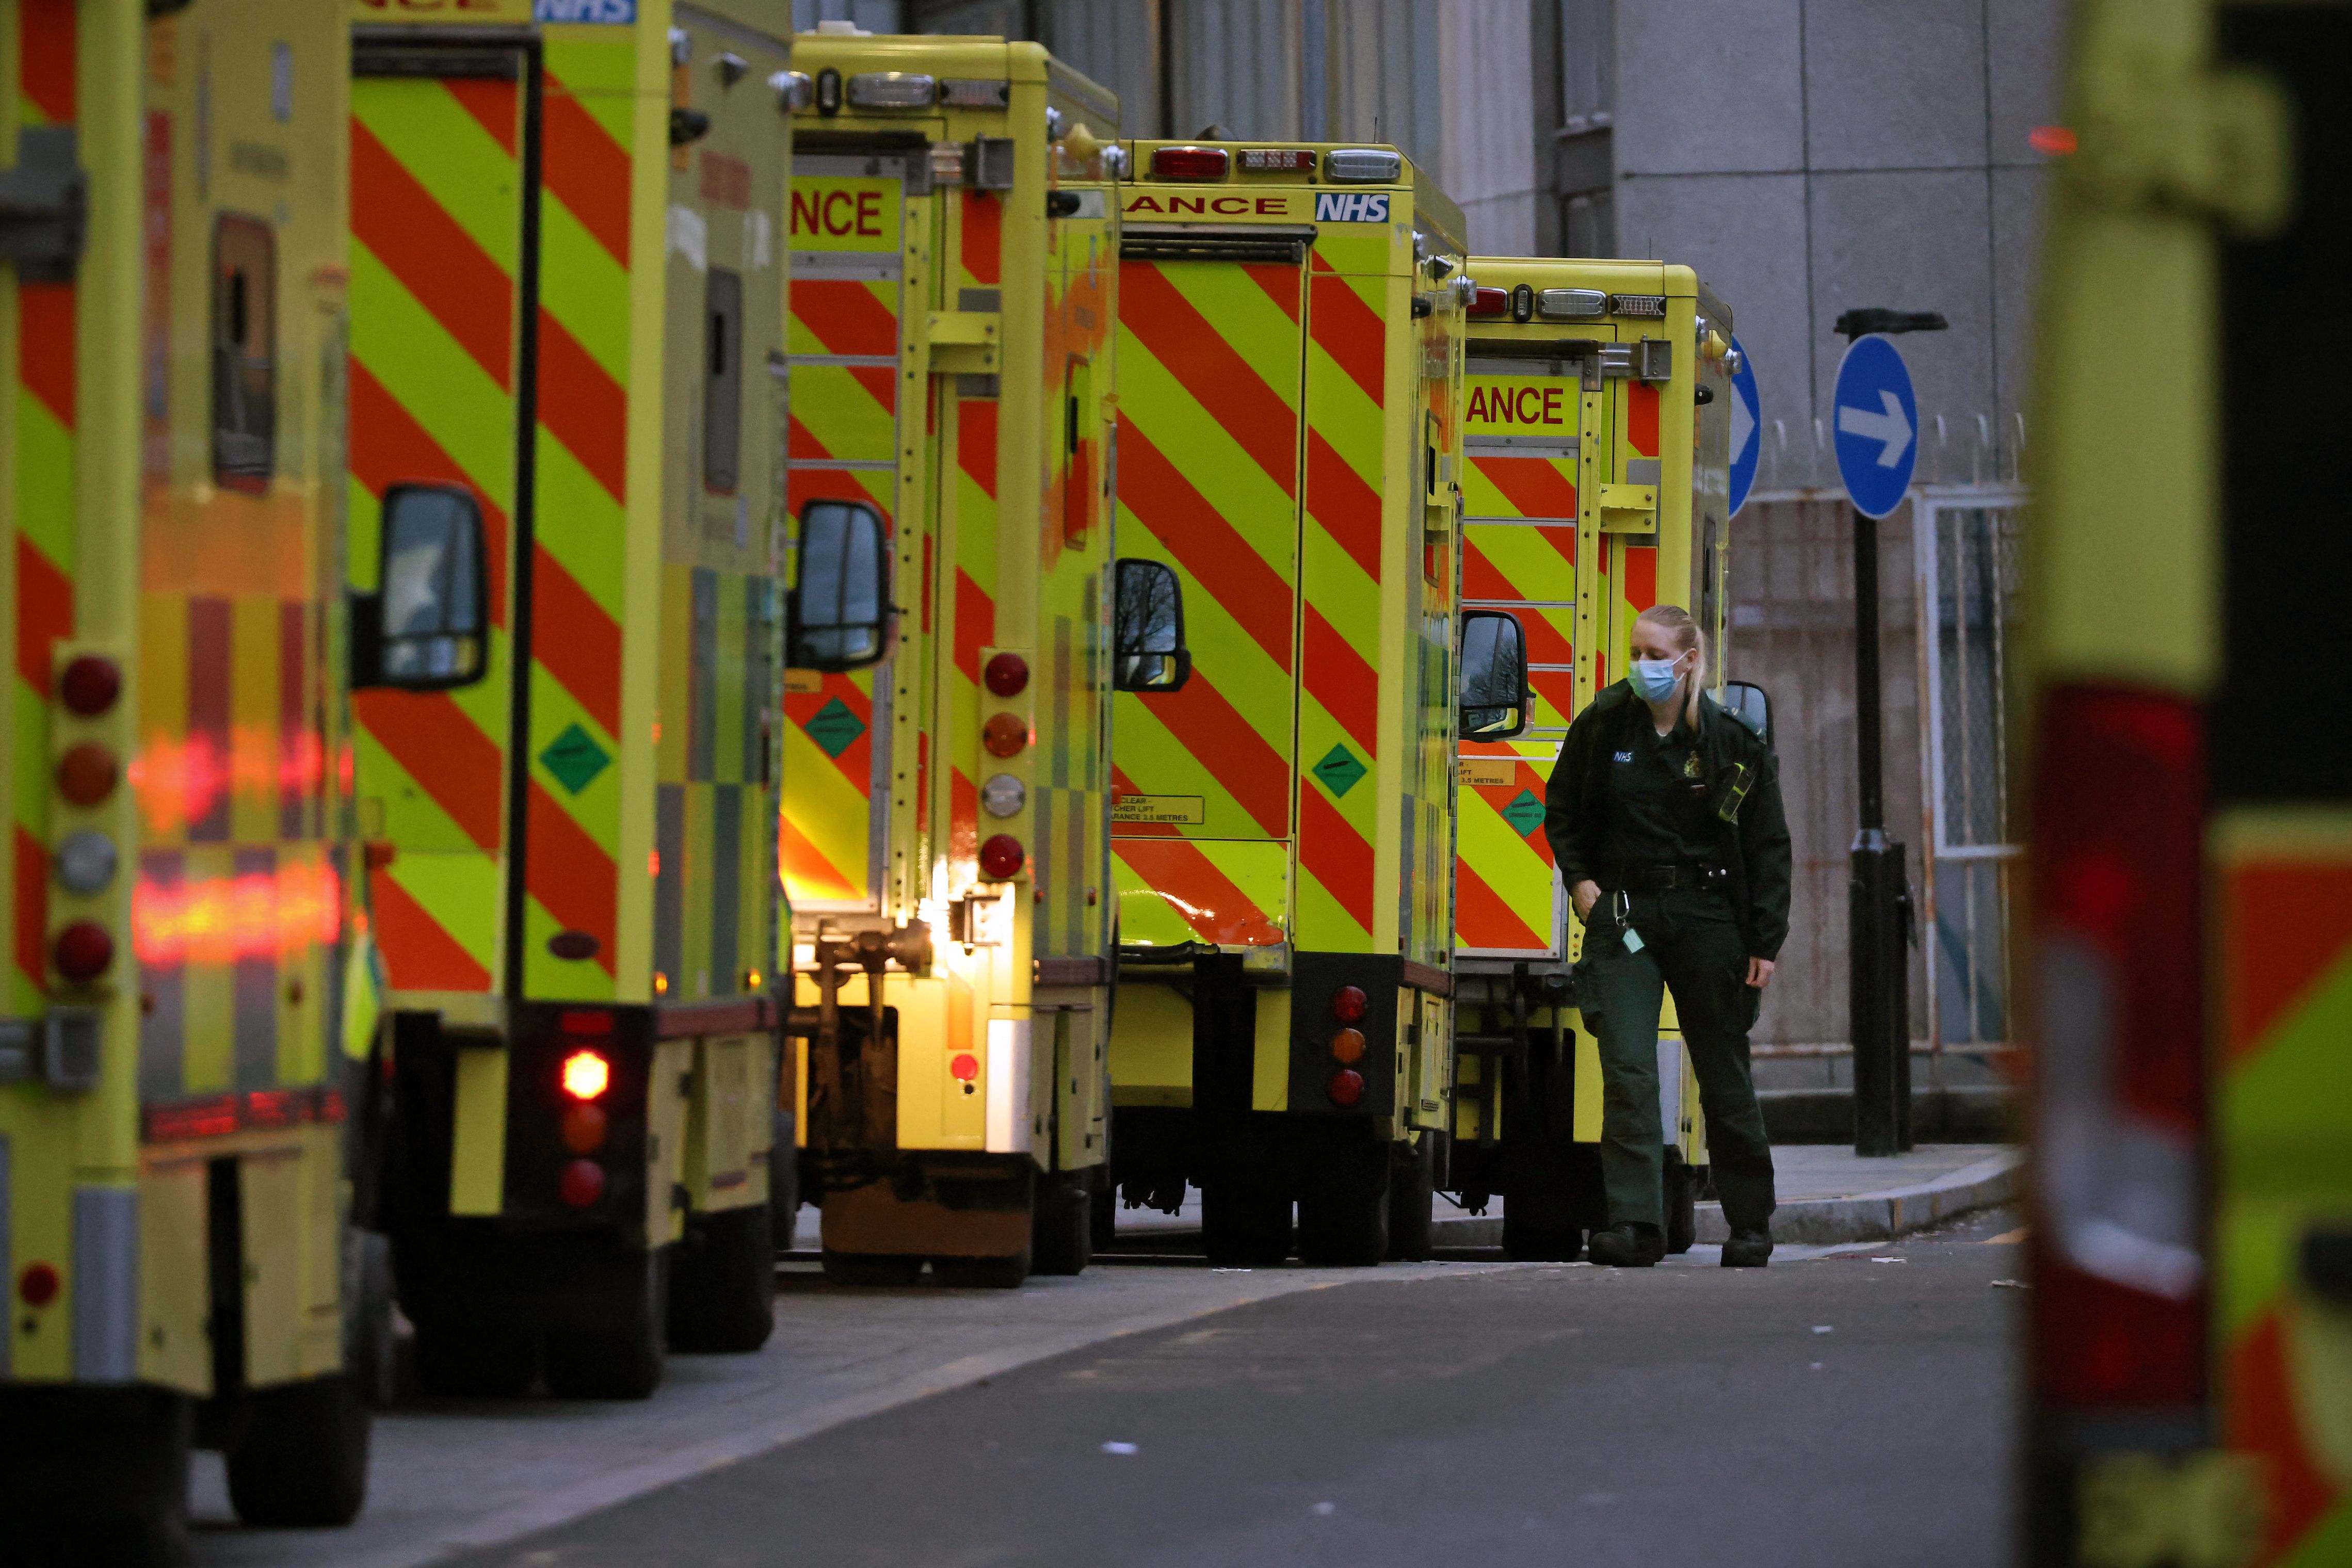 An Ambulance crew member is seen alongside ambulances parked outside the Royal London hospital in London on December 28, 2021. - England has been pressing ahead with its Covid-19 immunisation campaign in the race to inoculate as many people possible while the number of cases of the Omicron coronavirus variant soars.